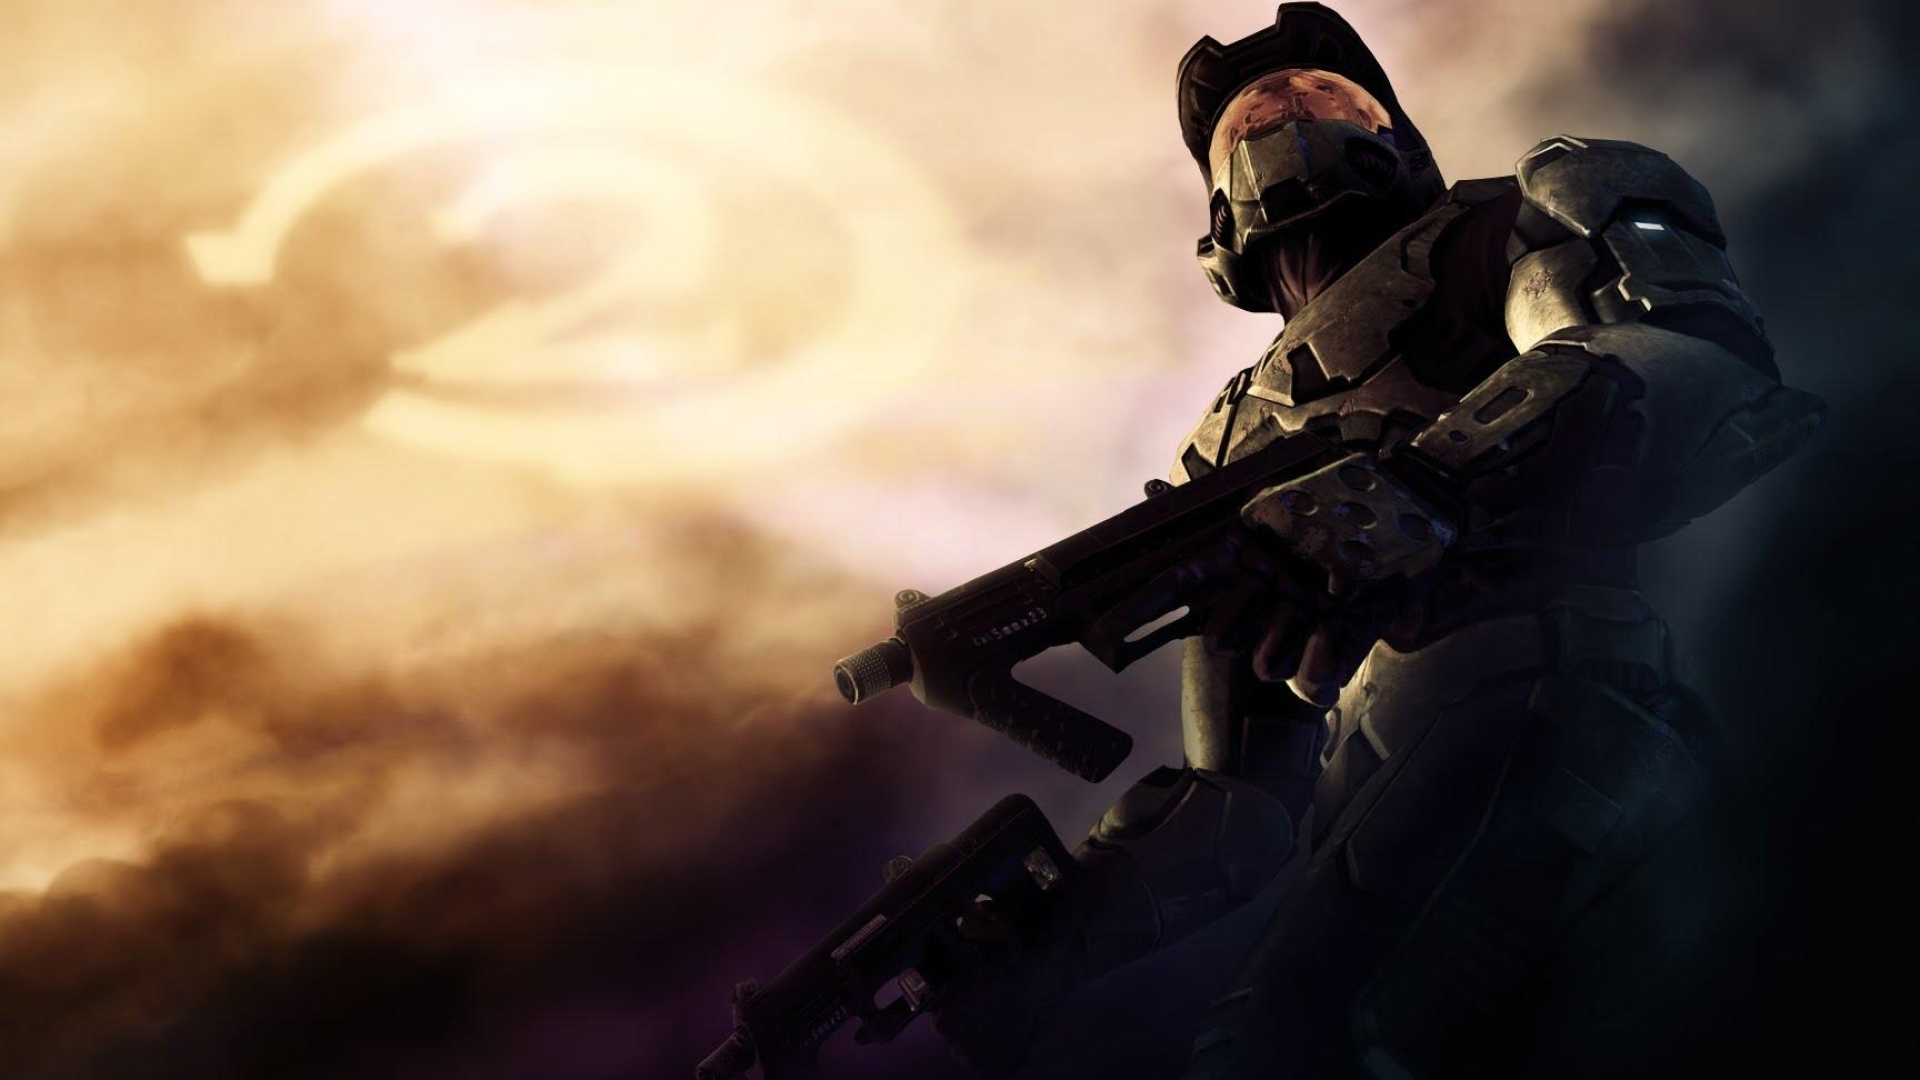 Halo 2 Wallpapers 1920x1080